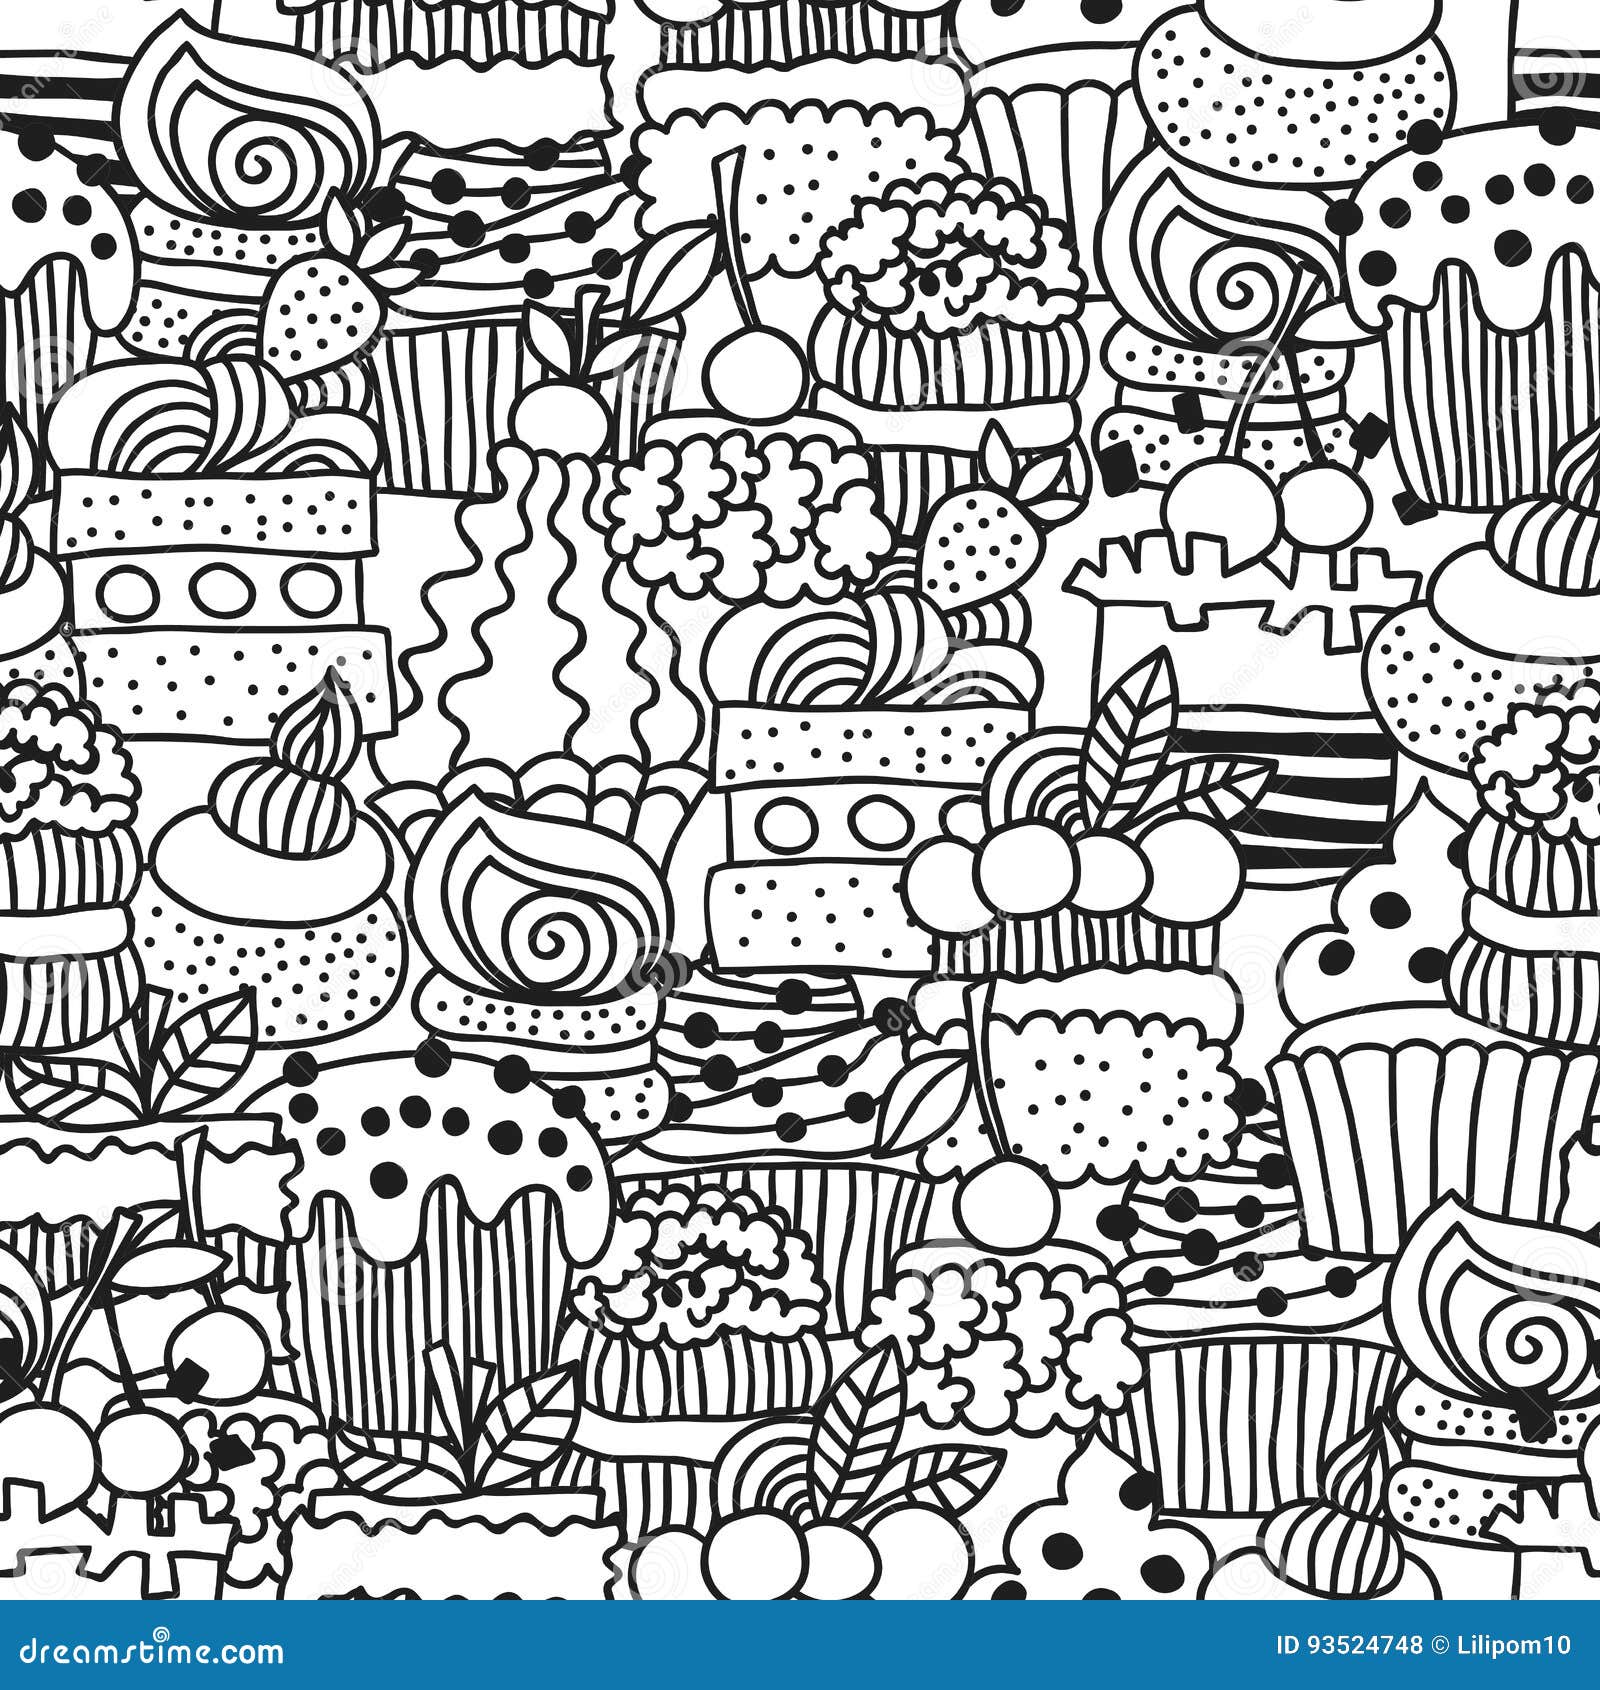 Download Sweet Cakes, Cupcakes. Black And White Seamless Pattern With Dessert For Coloring Books. Doodle ...